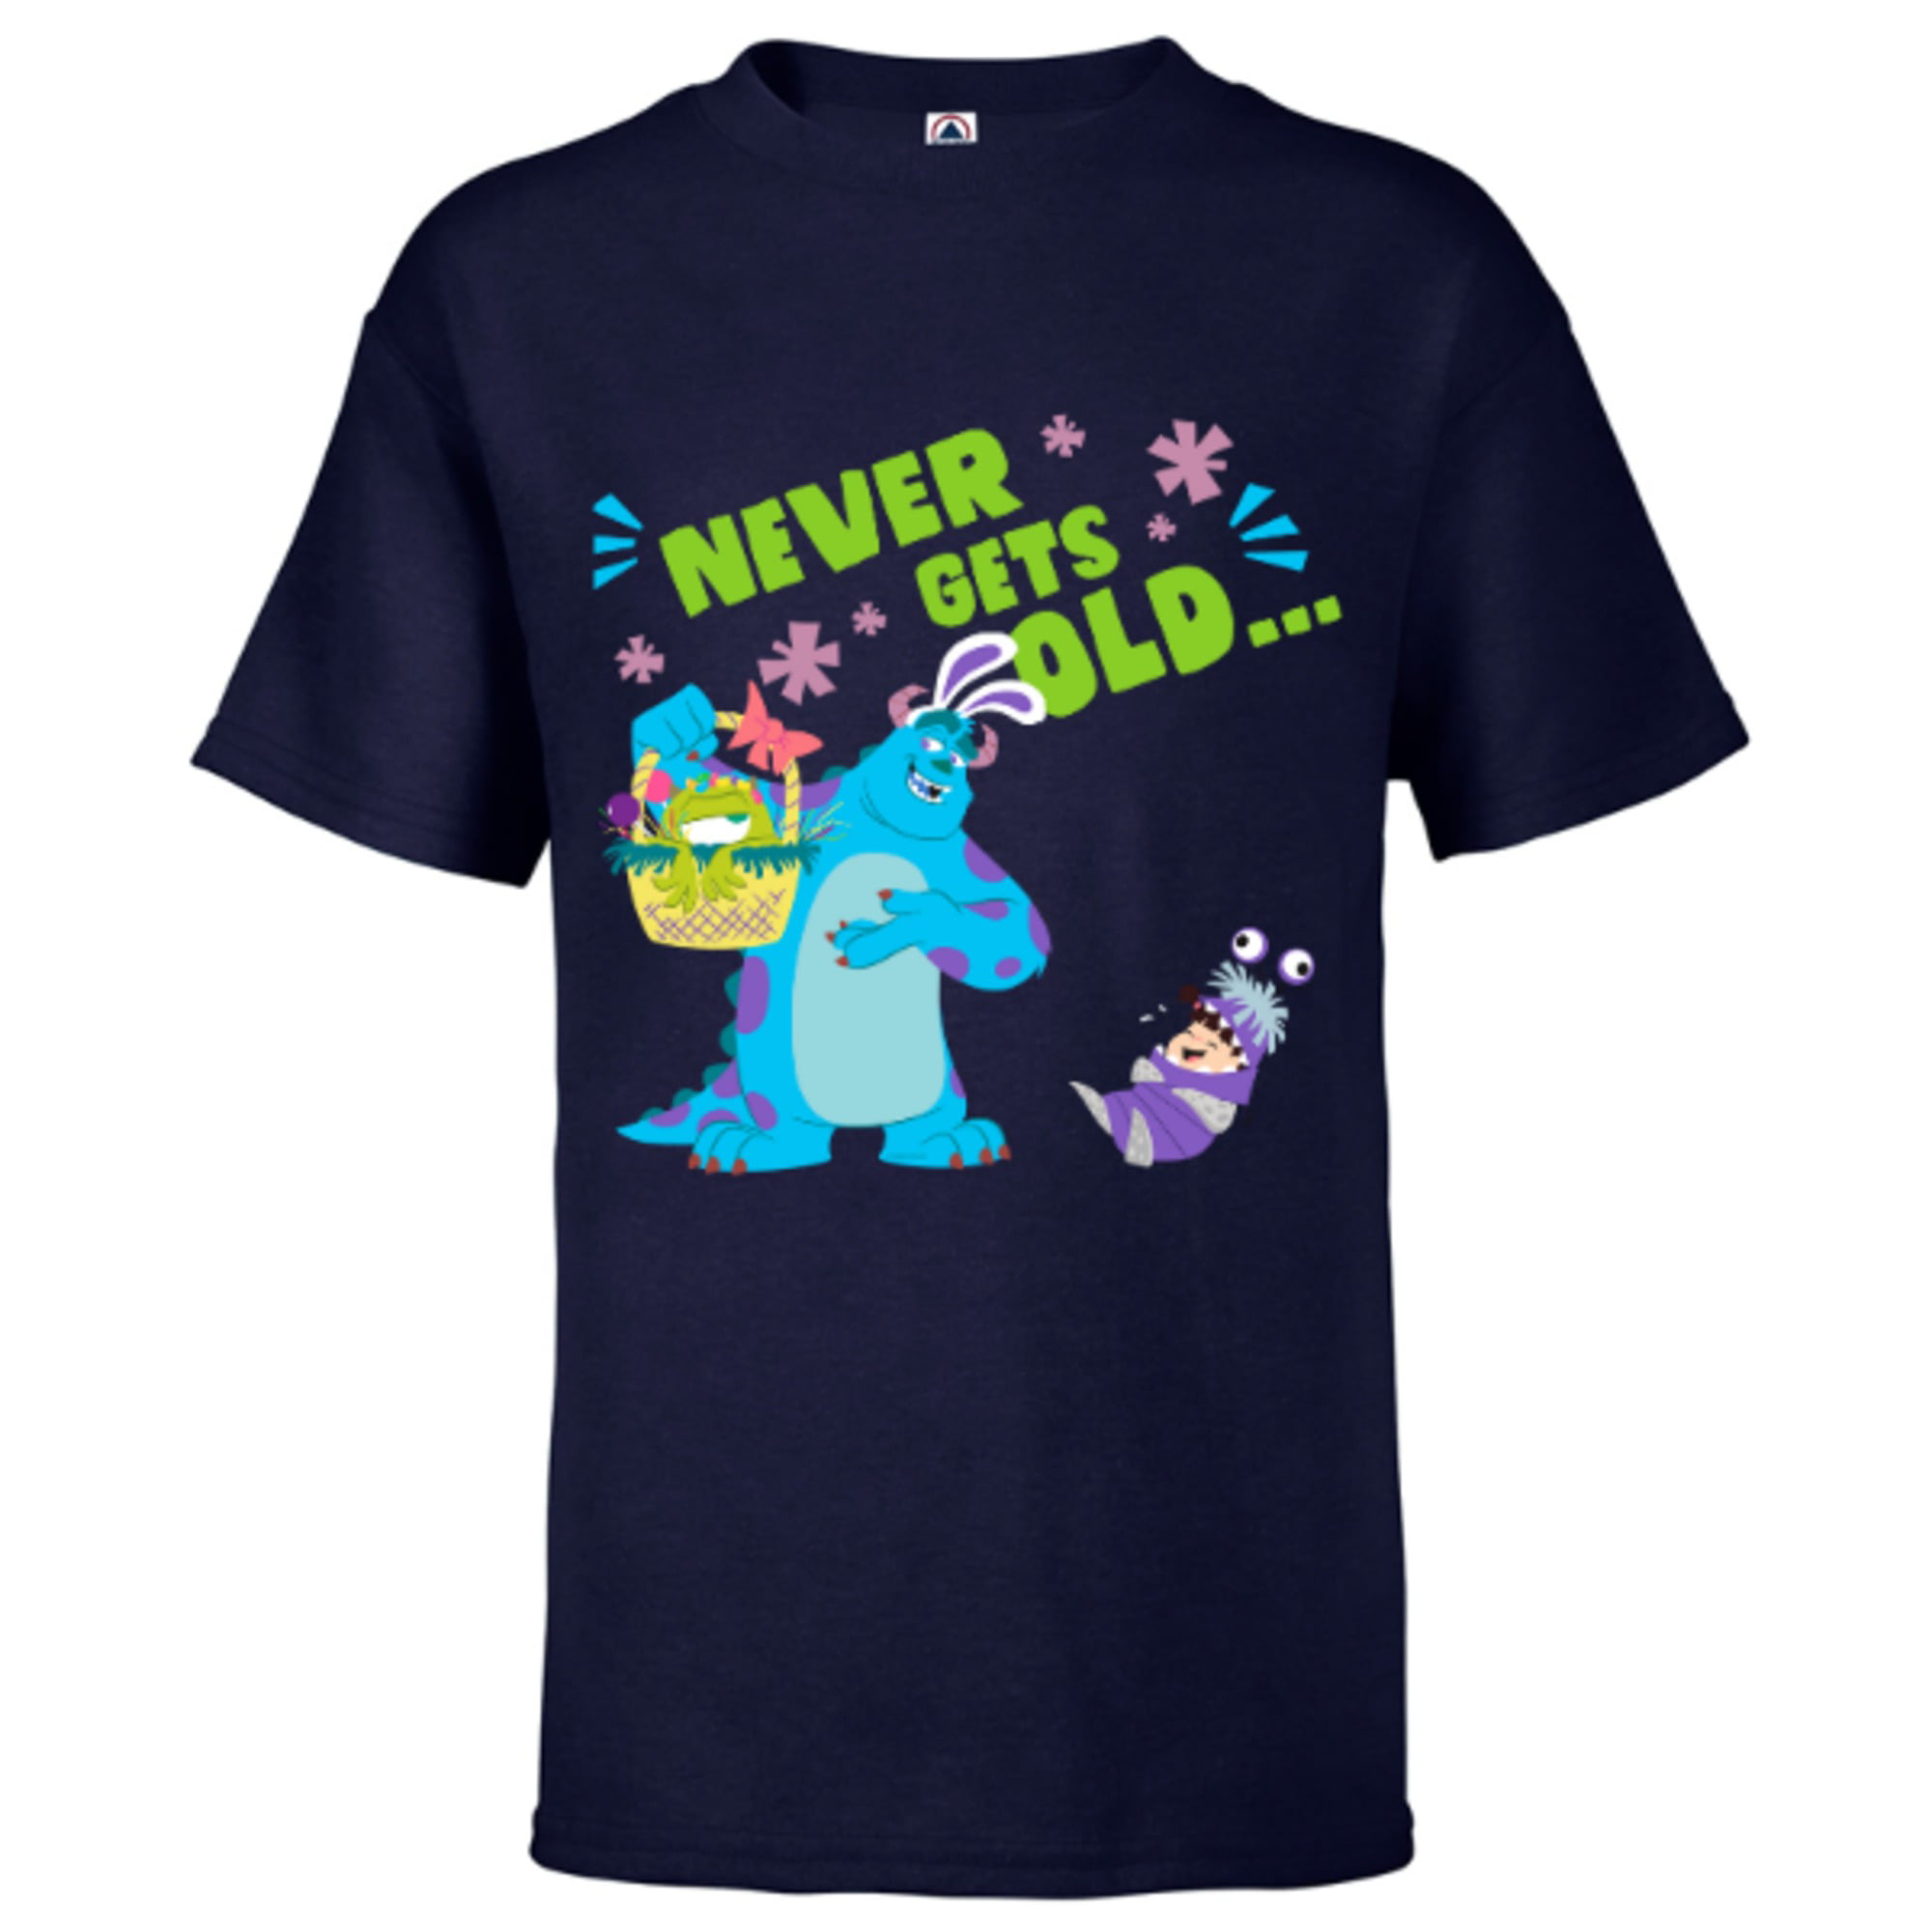  Disney and PIXAR's Monsters, Inc. Video Game Scare Squad  Sweatshirt : Clothing, Shoes & Jewelry